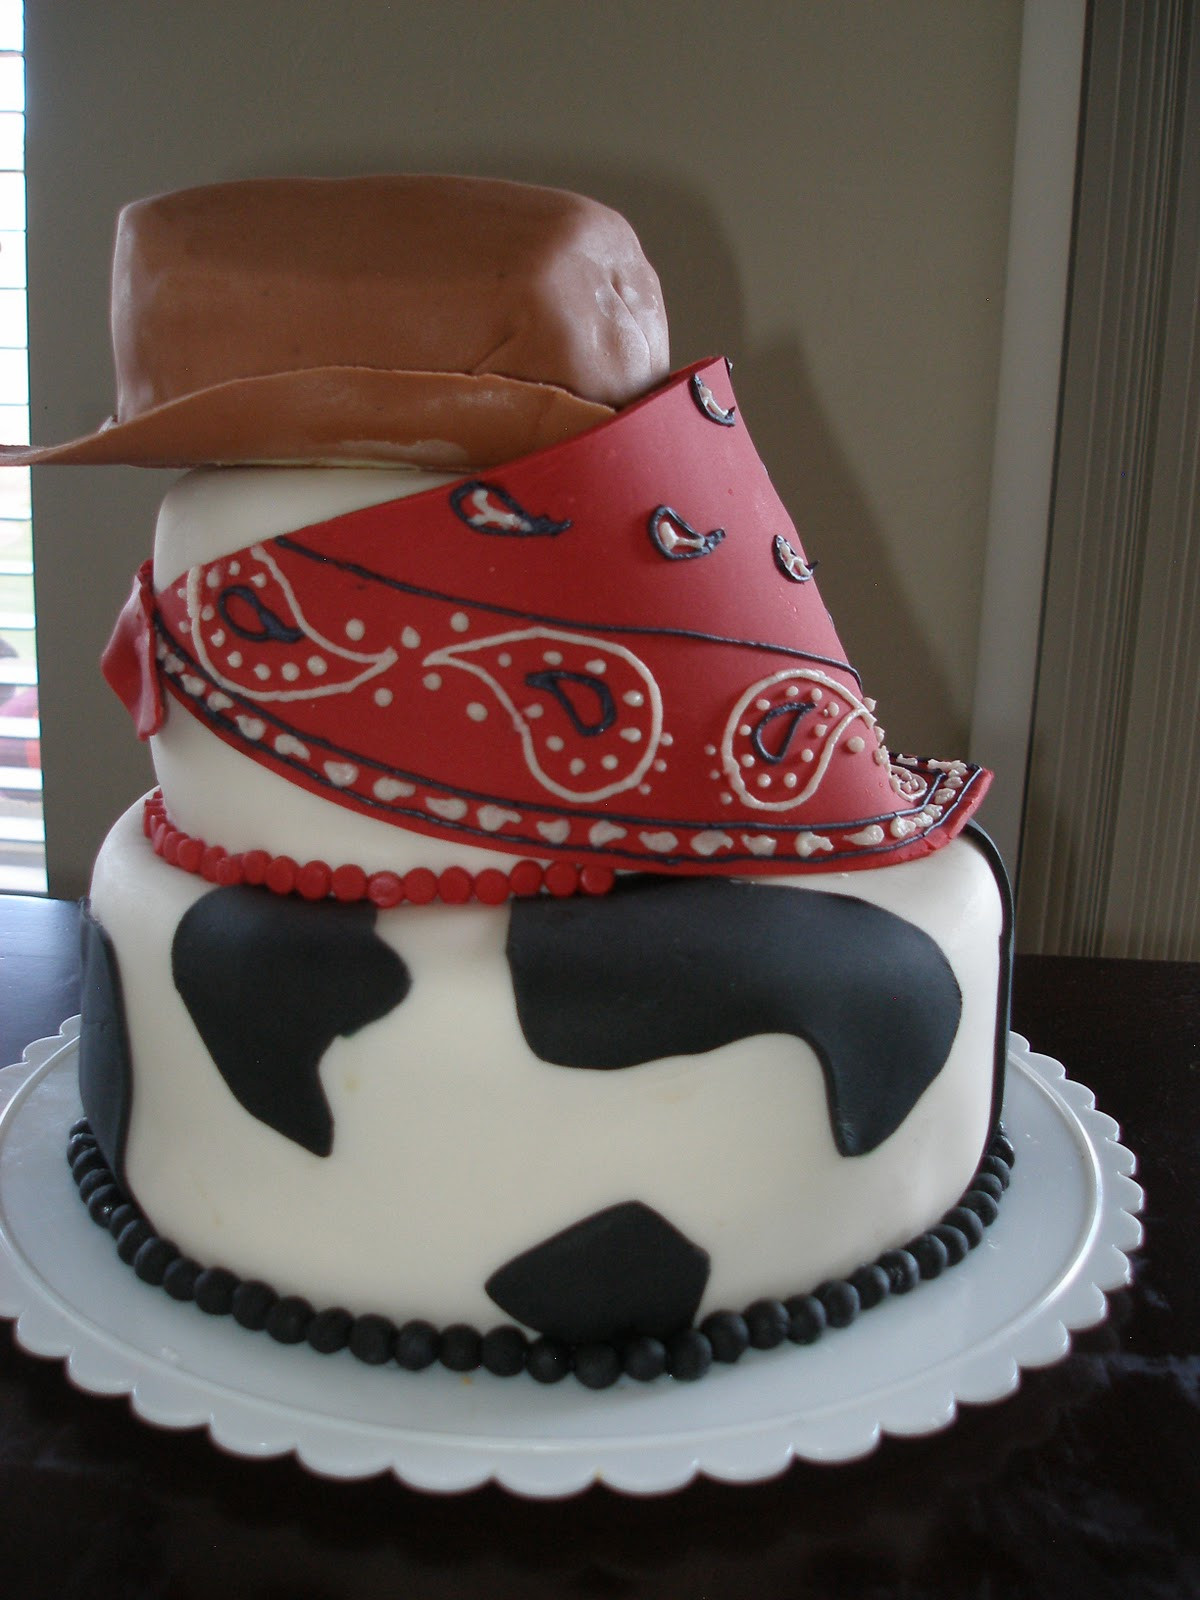 Cowboy Birthday Cake
 D and T Catering